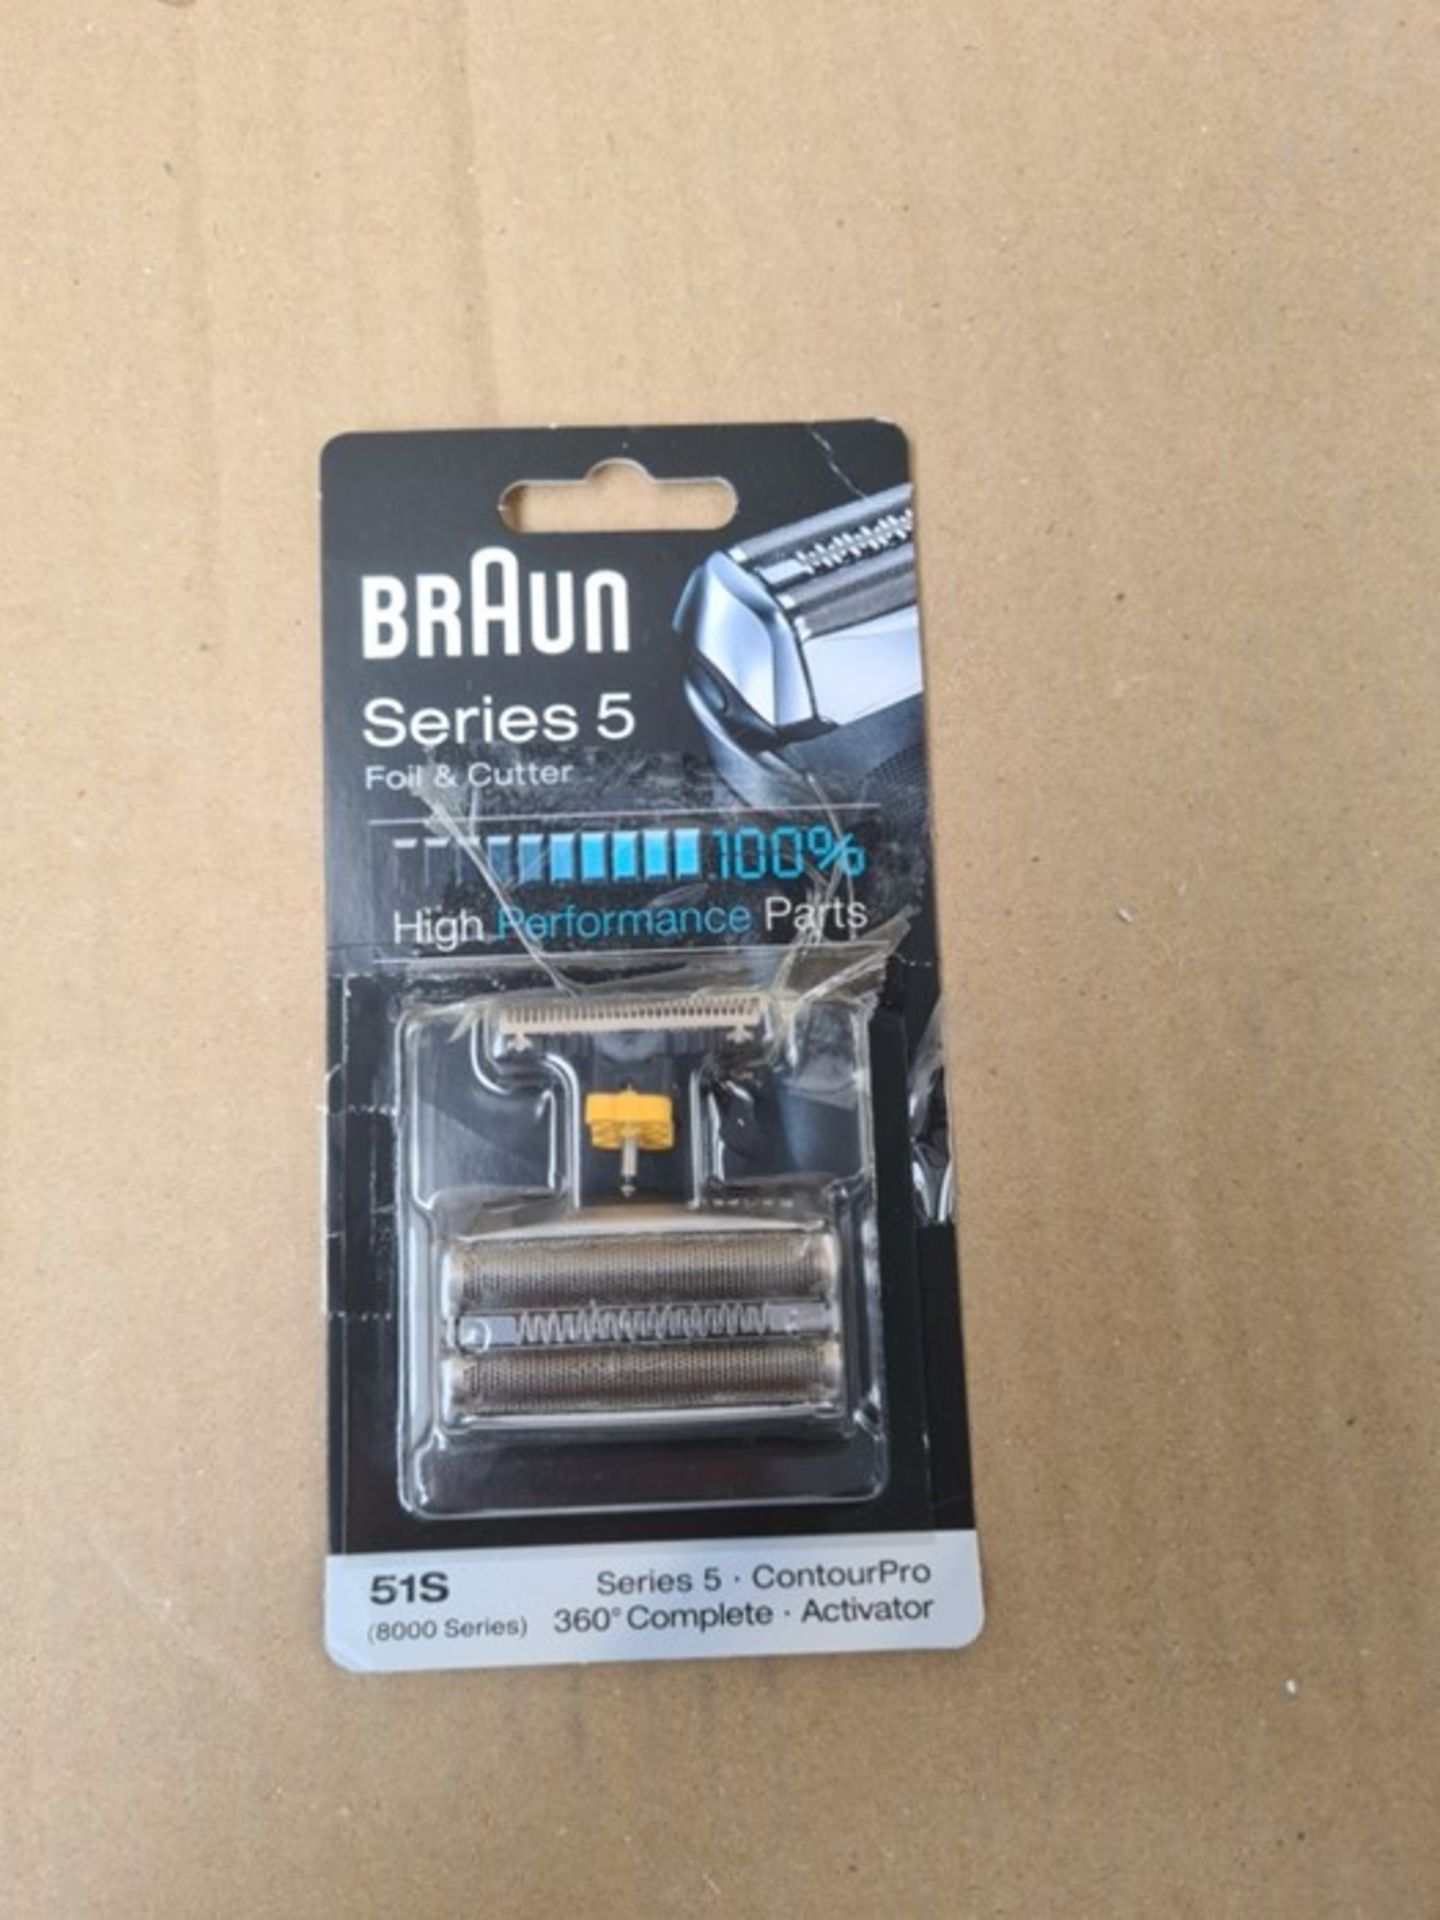 Braun electric shaver spare part 51S, compatible with Series 5 razors (old generation) - Image 2 of 2